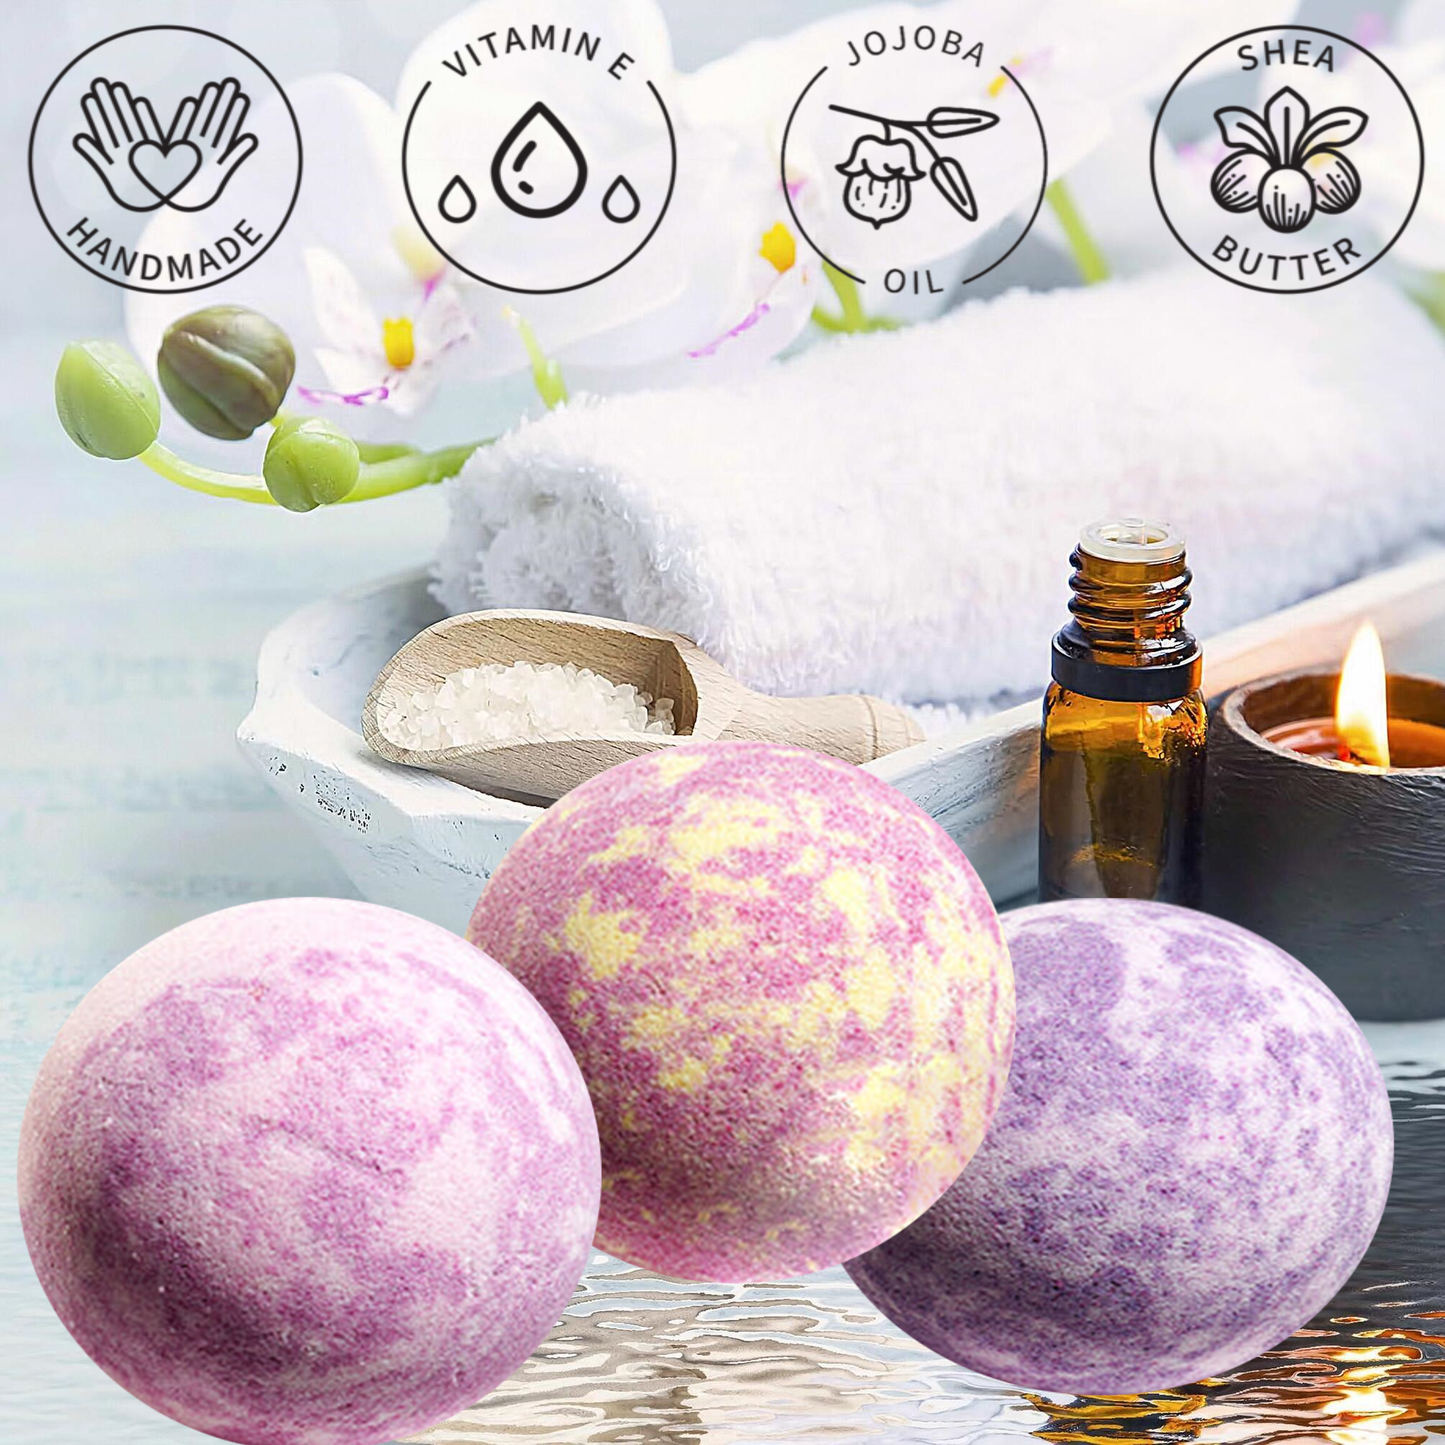  lovery Bath Bombs Gift, Bath Bombs Gift, Handmade Spa Bath Bombs Set, Relaxing Spa Balls Collection, Dissolving Scents in Bathwater, Lavender Healing Bath Bombs, Peppermint Inflammation Relief, Magnolia Skin Care Delight, Nourishing Bath Essentials, Vitamin E and Shea Butter Bliss, Cruelty-Free Bath Bombs, Handmade Love for Self-Care